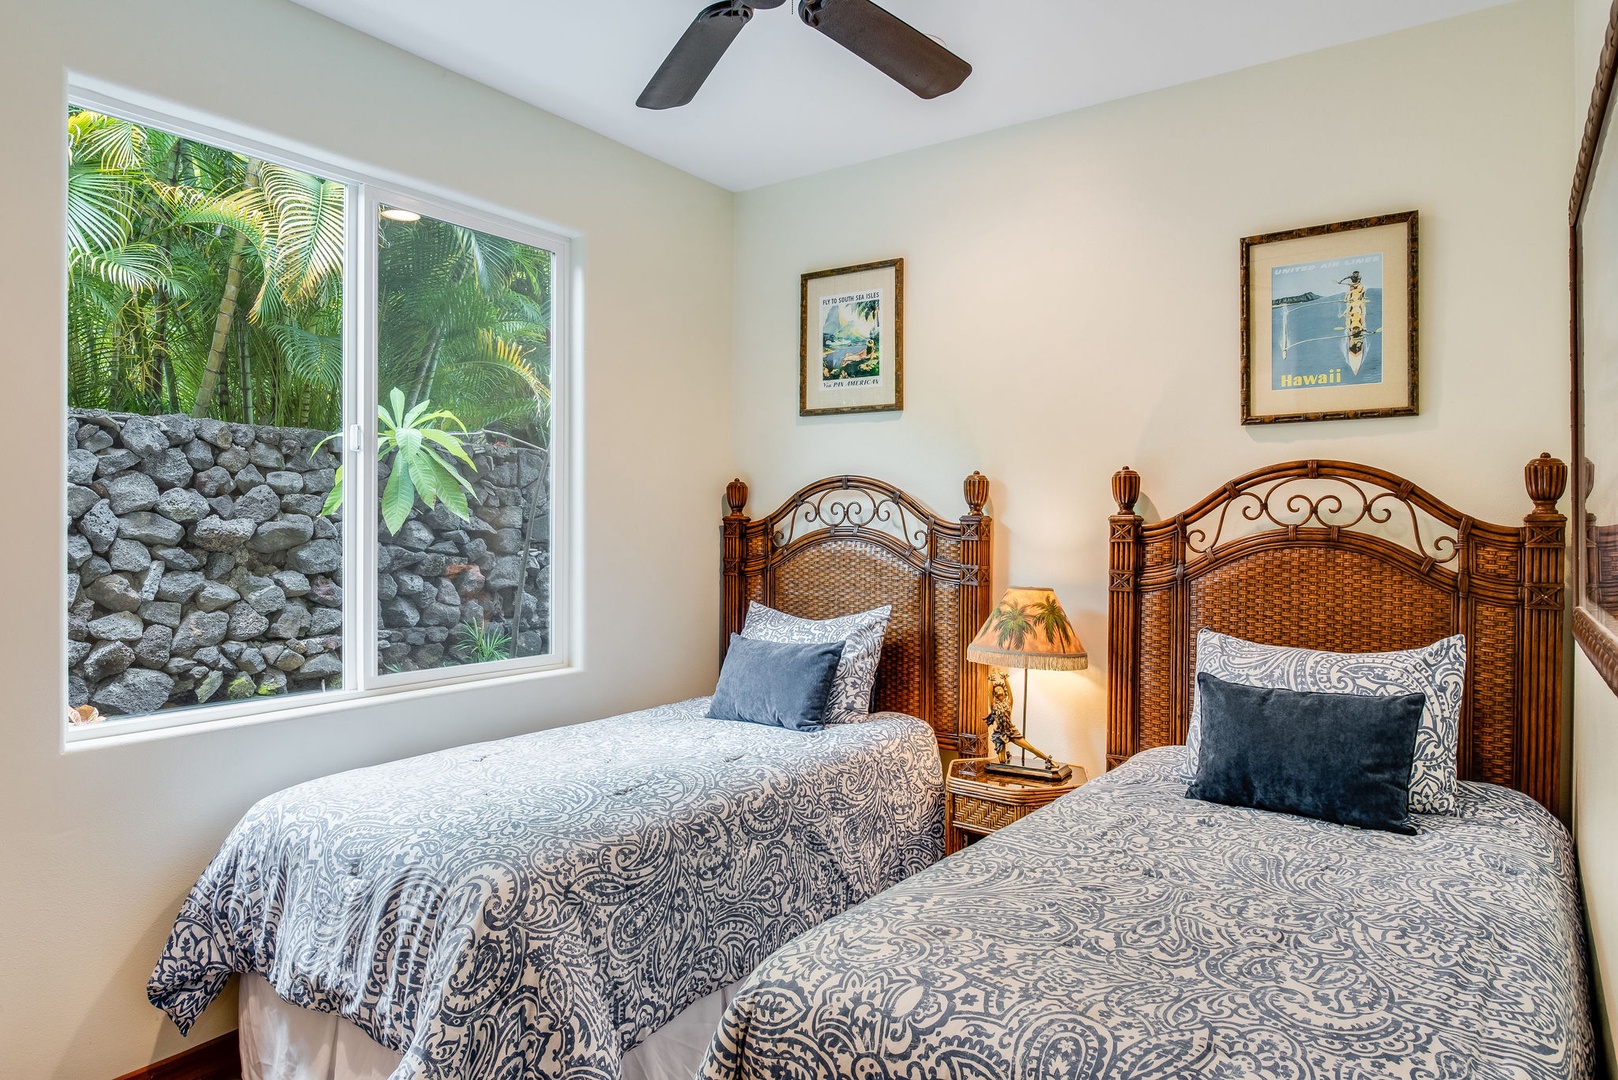 Kailua Kona Vacation Rentals, Kona Beach Bungalows** - Rest easy in Honu's twin beds, promising serene dreams and morning rejuvenation.